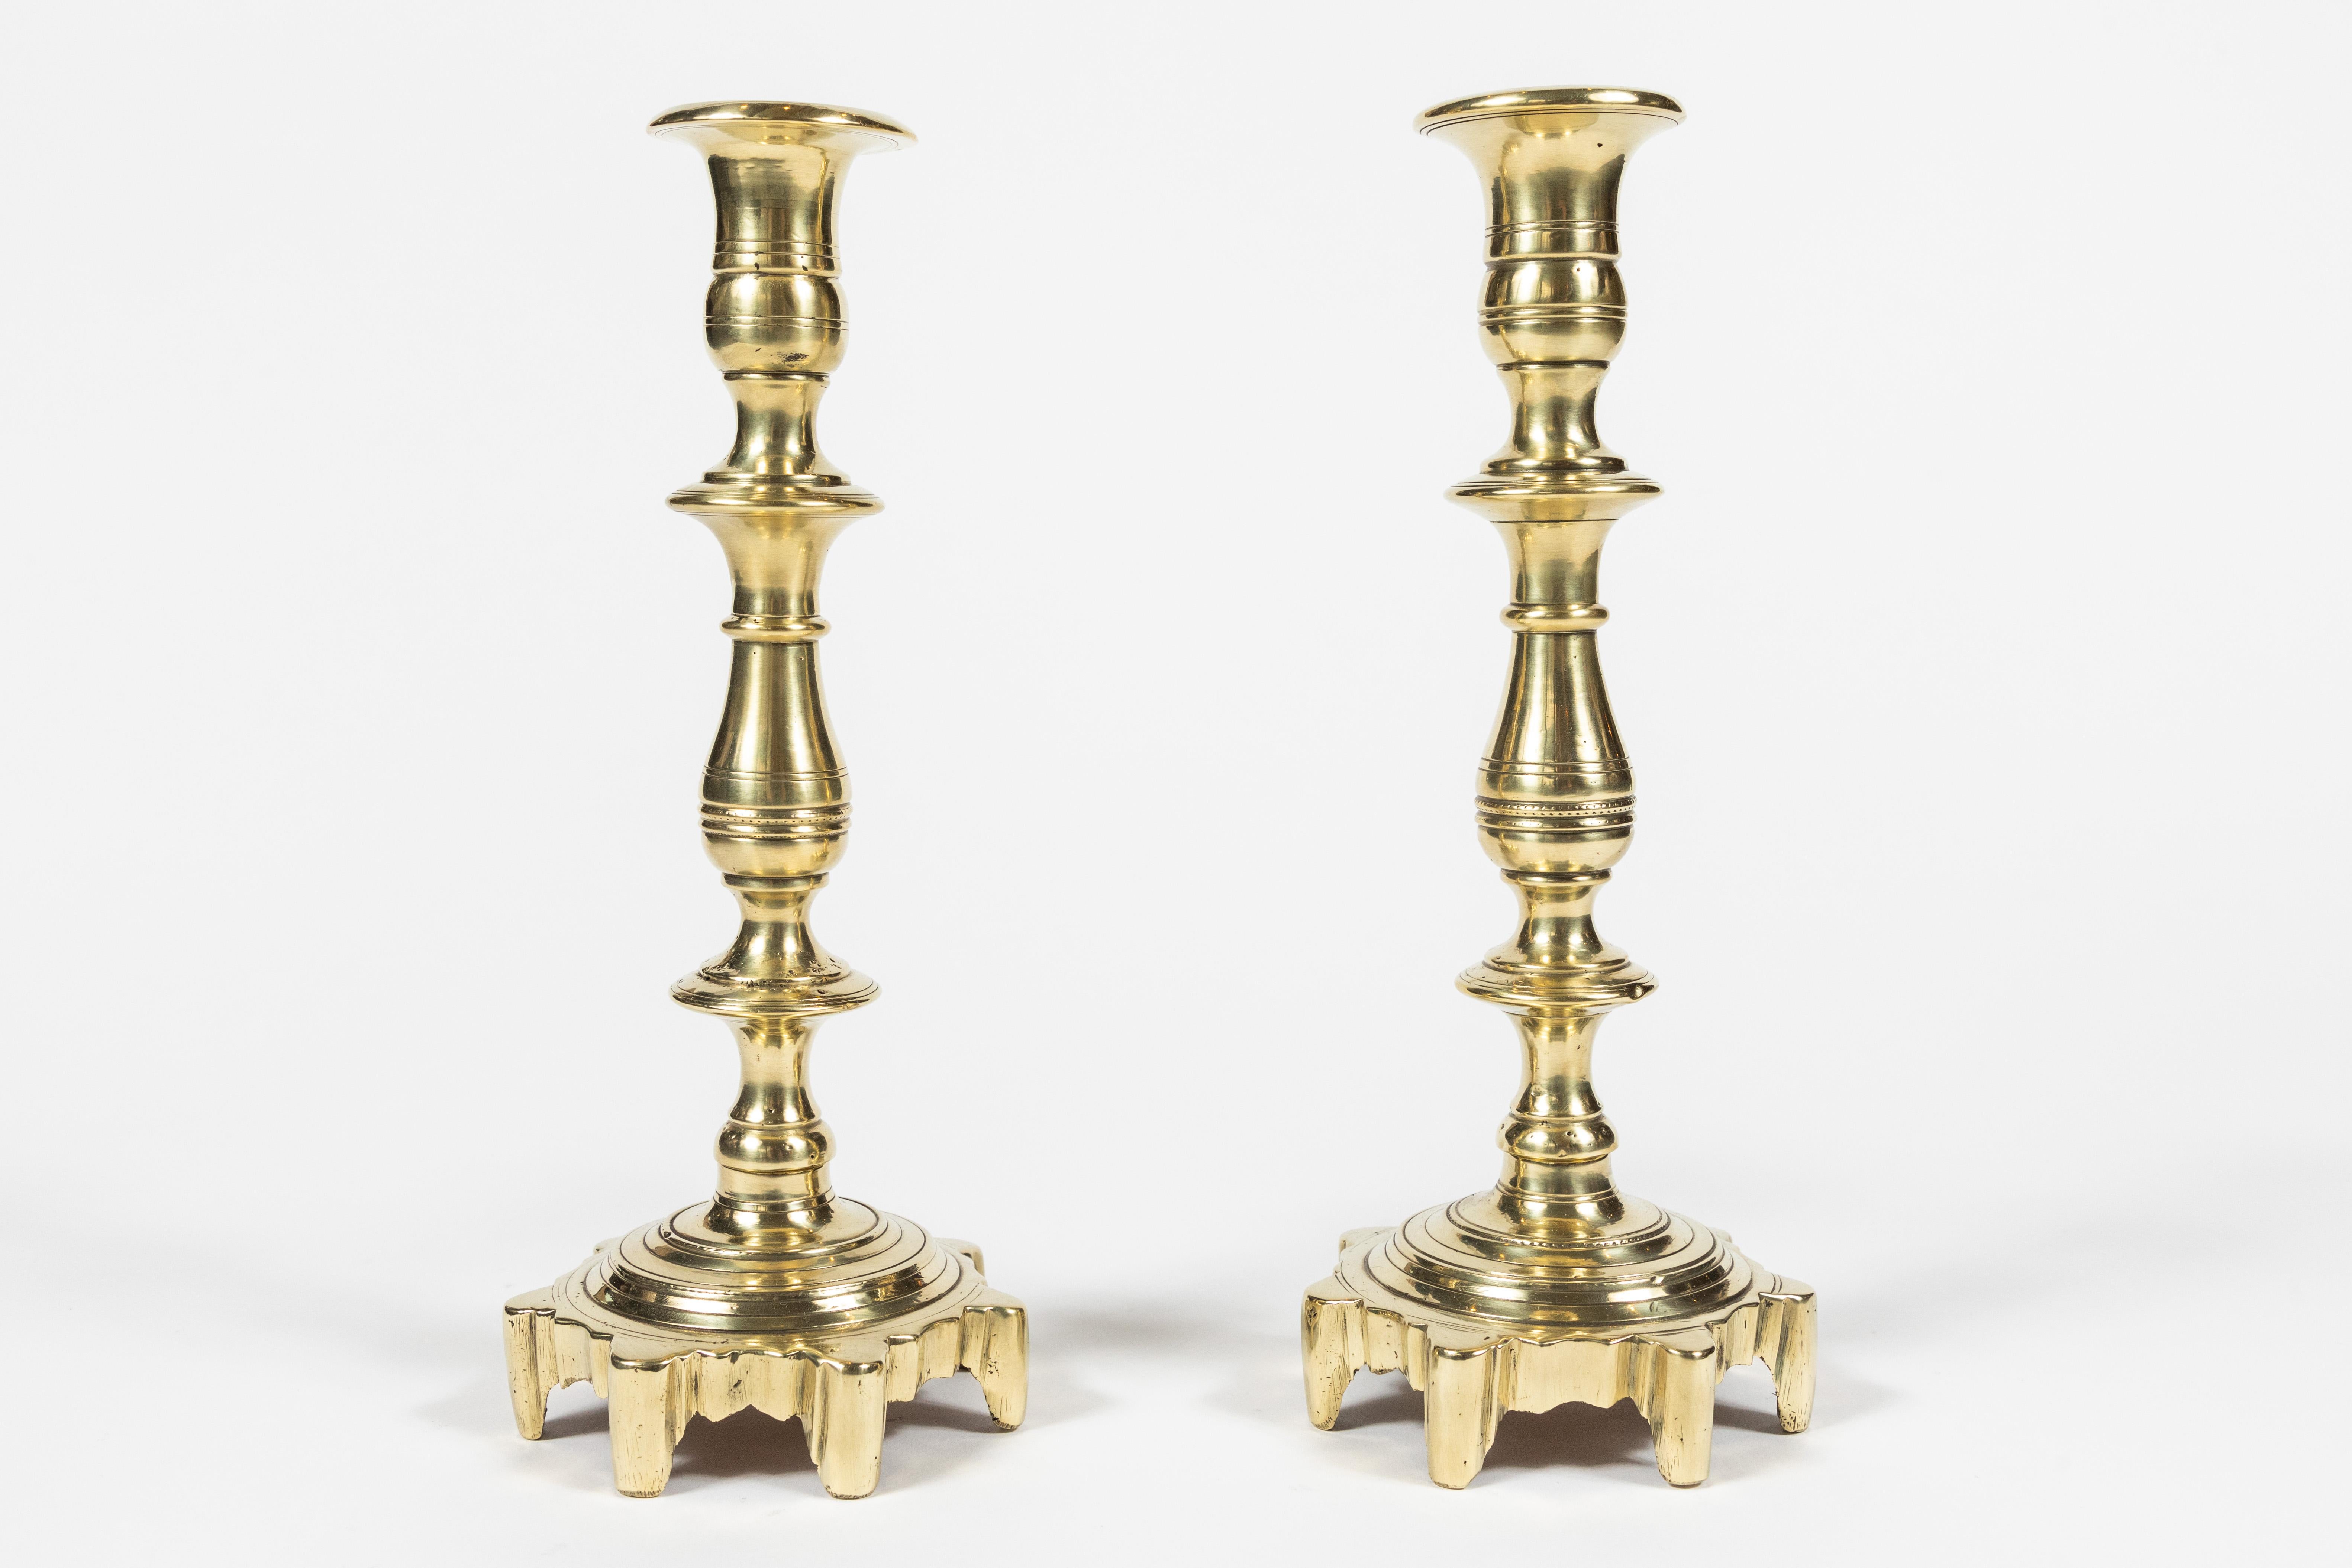 Pair of antique turned stem and multi foot base brass candlestick.